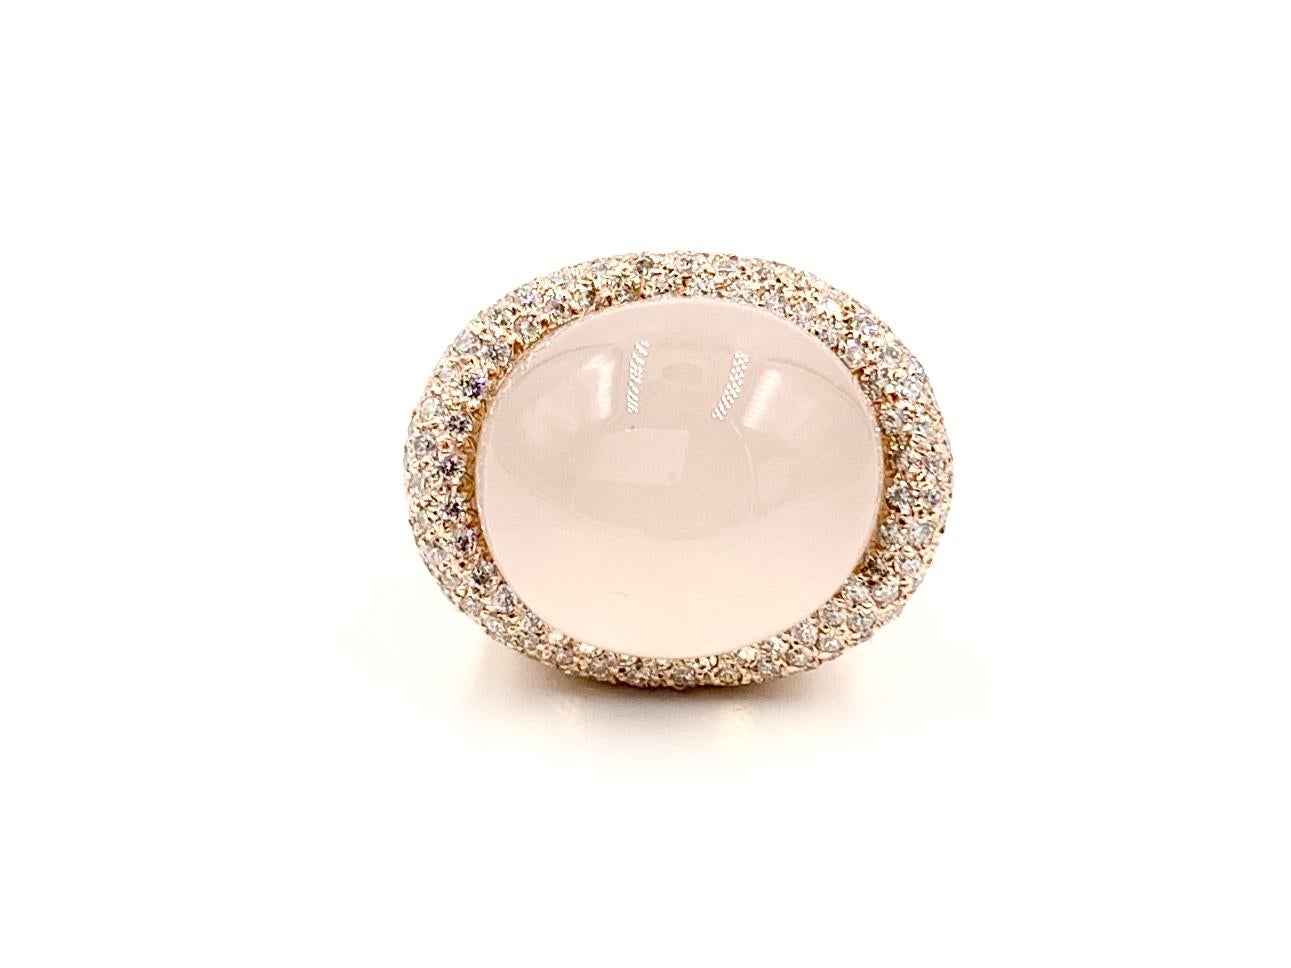 A unique modern statement piece. This high-polished 14 karat rose gold large cocktail ring features a pastel, baby pink cabochon domed rose quartz surrounded by 1.80 carats of high quality diamonds for a generous amount of sparkle that contrasts